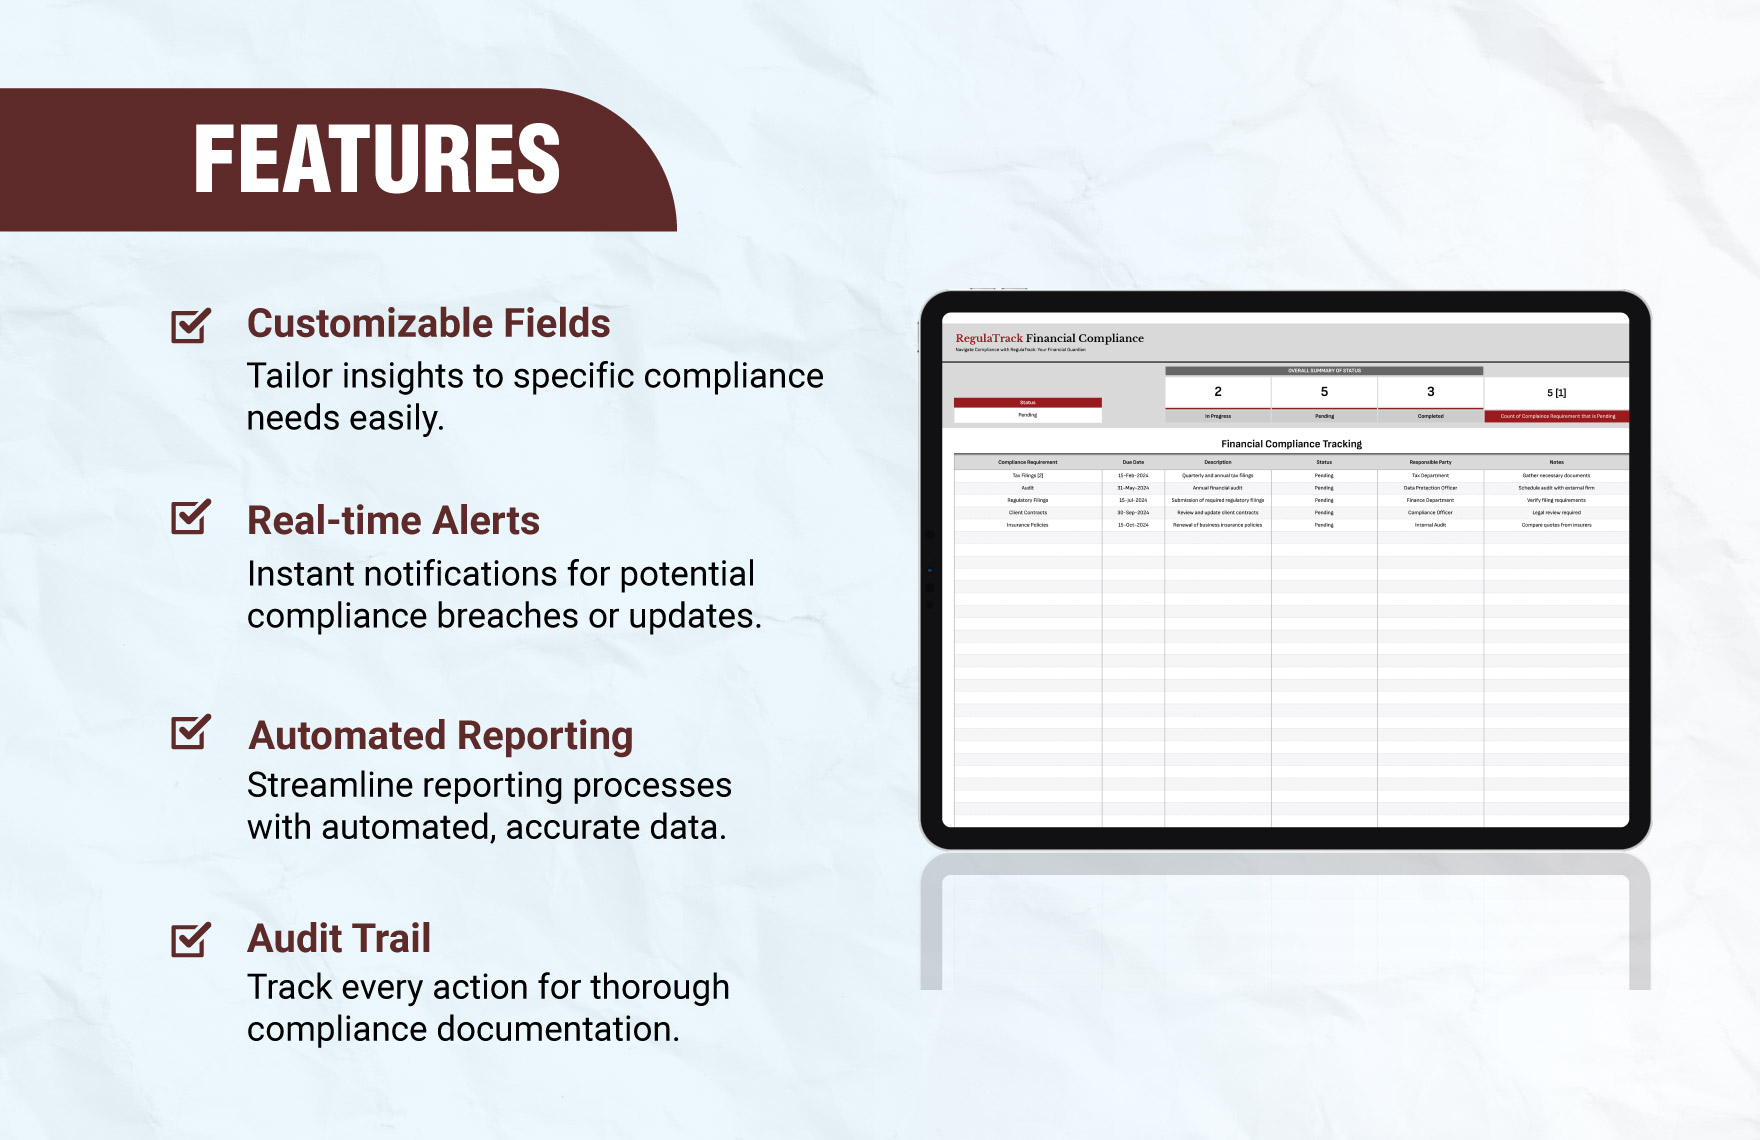 Financial Compliance Tracking Template